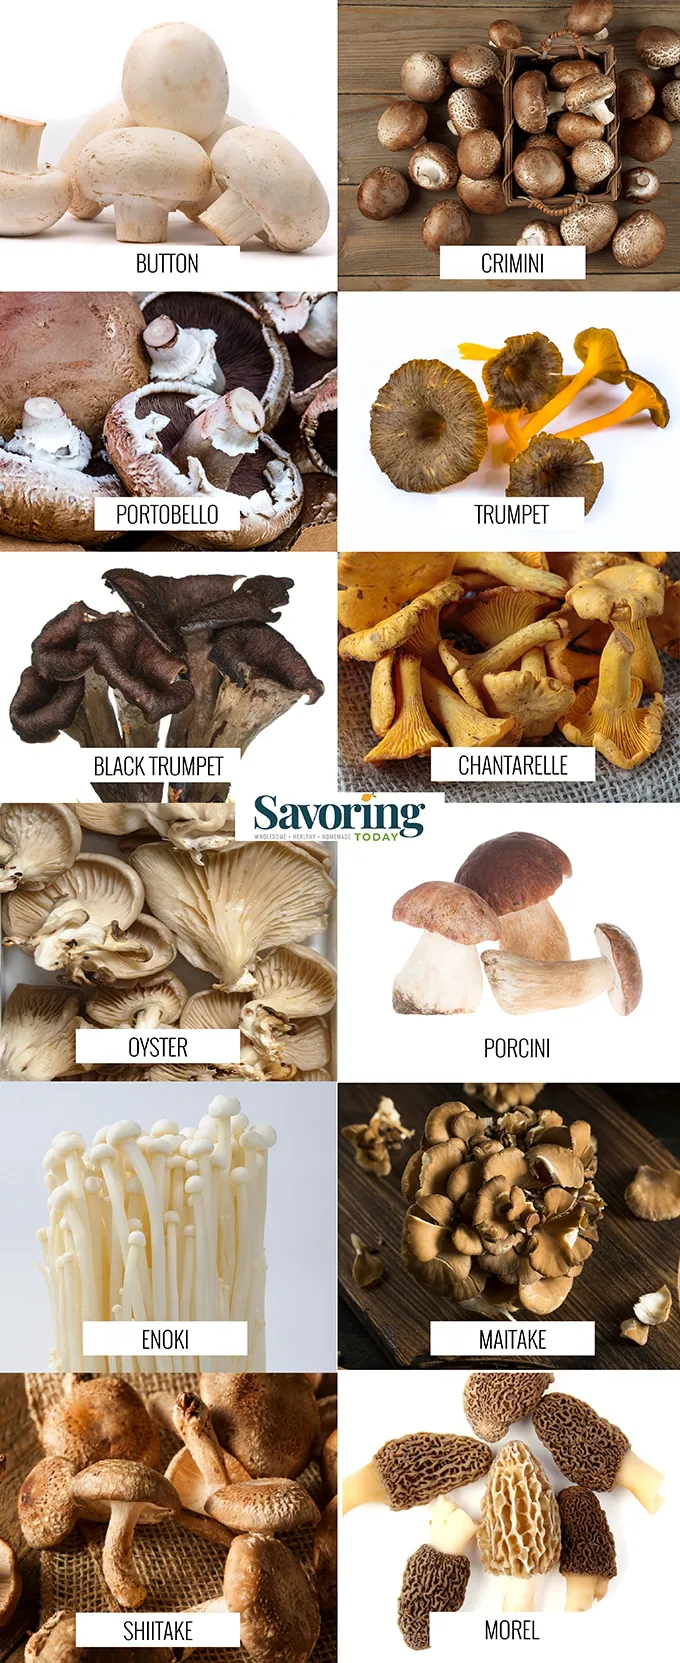 Images and labels of 12 different types of mushrooms